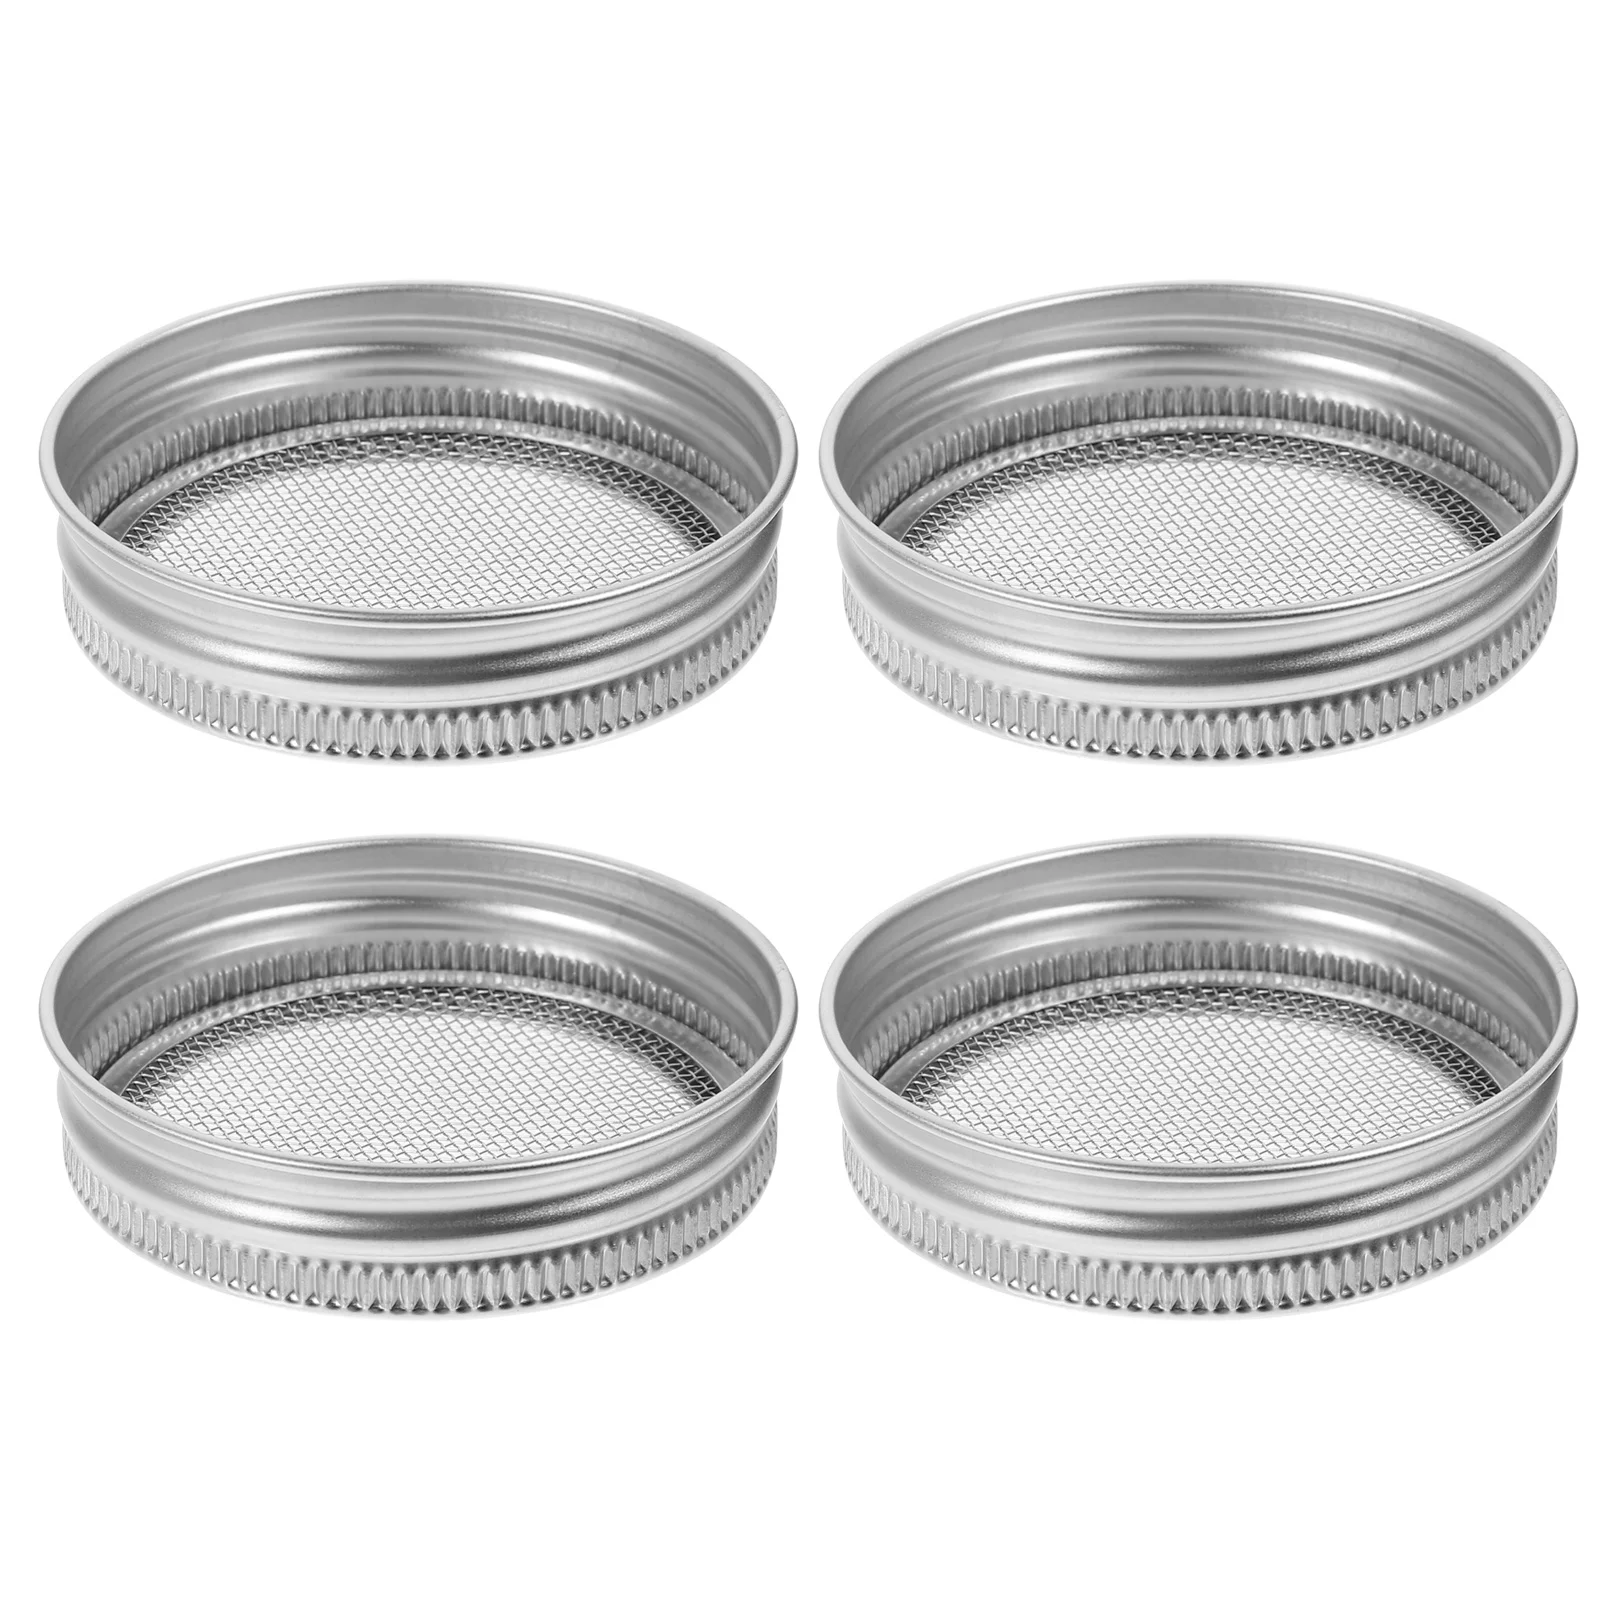 

4 Pcs Sprouting Lids Stainless Strainer Sprouting Cans Mesh Strainer Mason Jar Sprout Lids Screen Canning Jars Lids